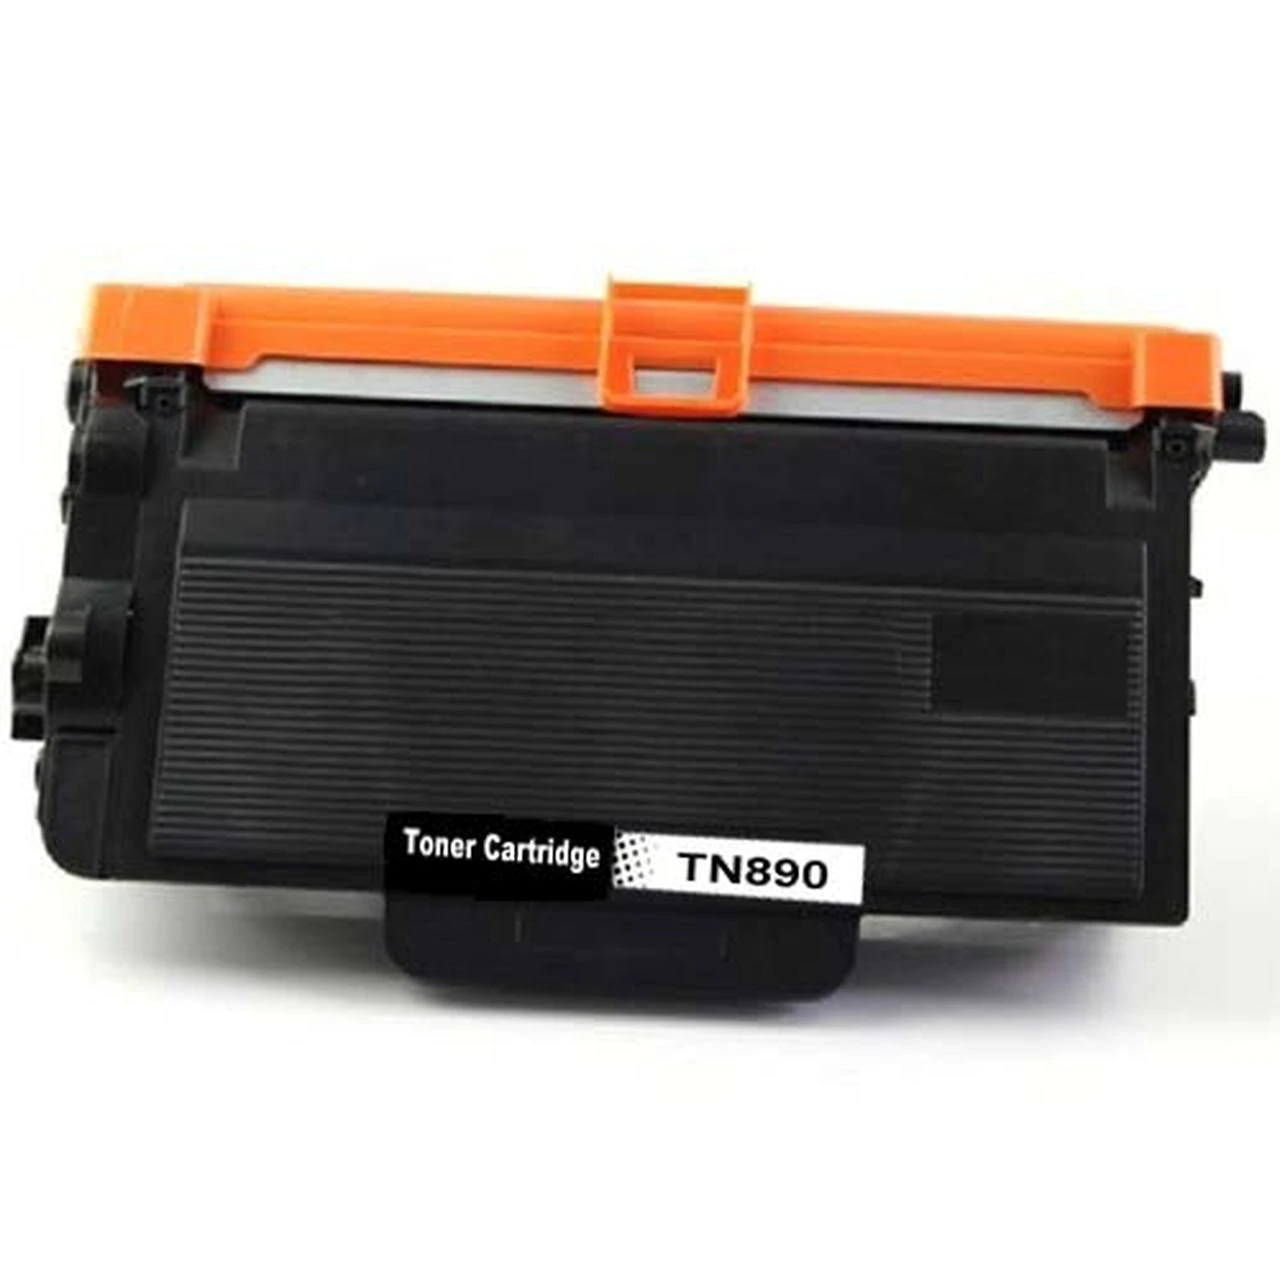 Brother TN890 Compatible Black Toner Cartridge, Extended Yield, 20,000 Page Yield - TON-TN890-CPT